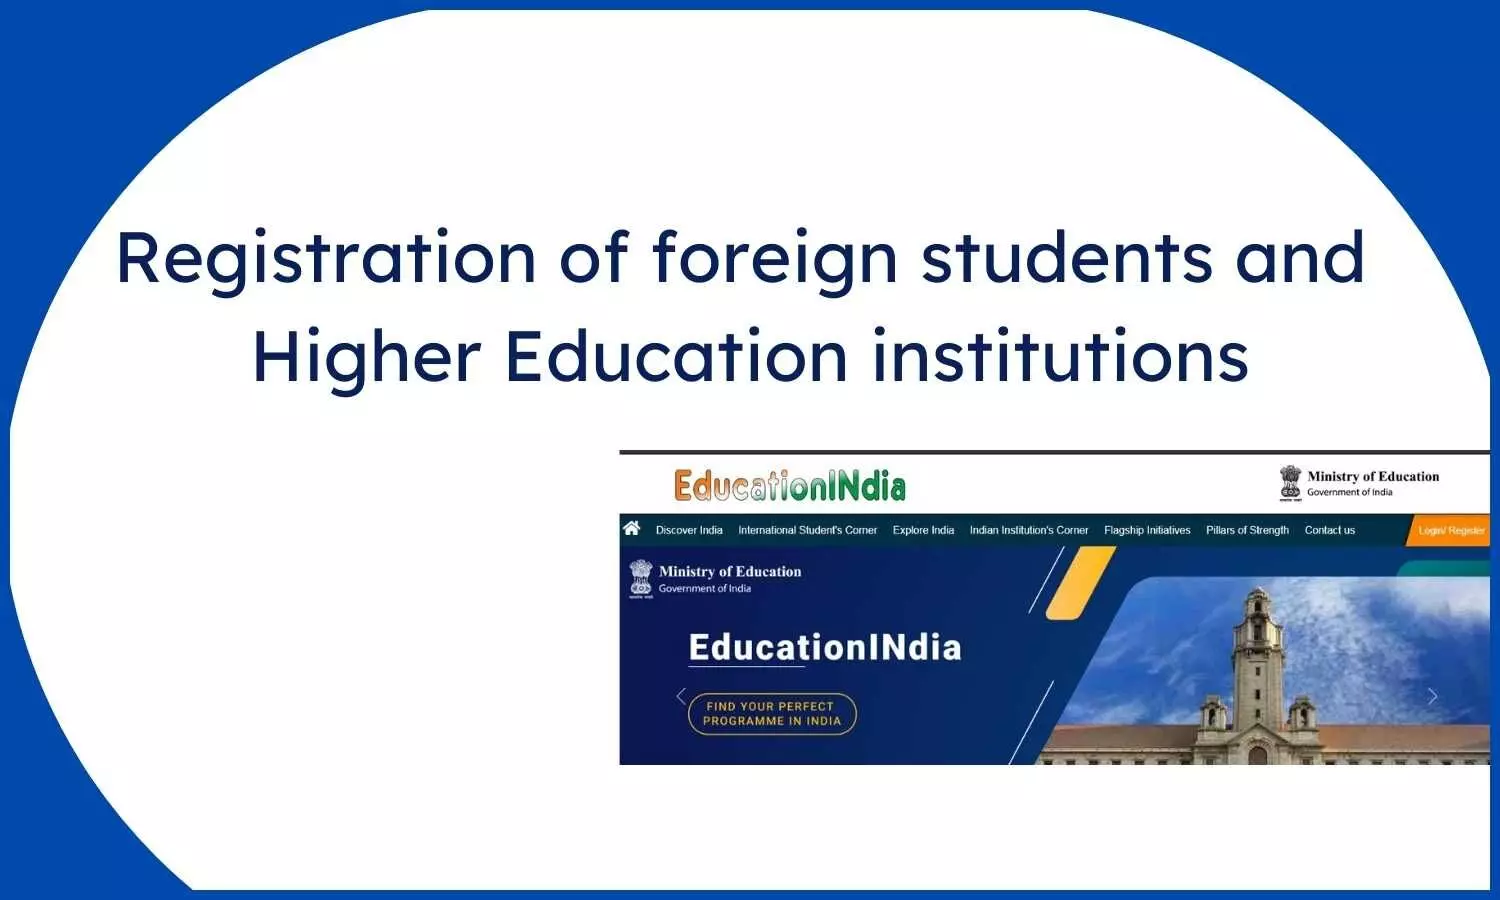 ALL Foreign Students, Higher Education Institutes need to register on EducationlNdia: NMC